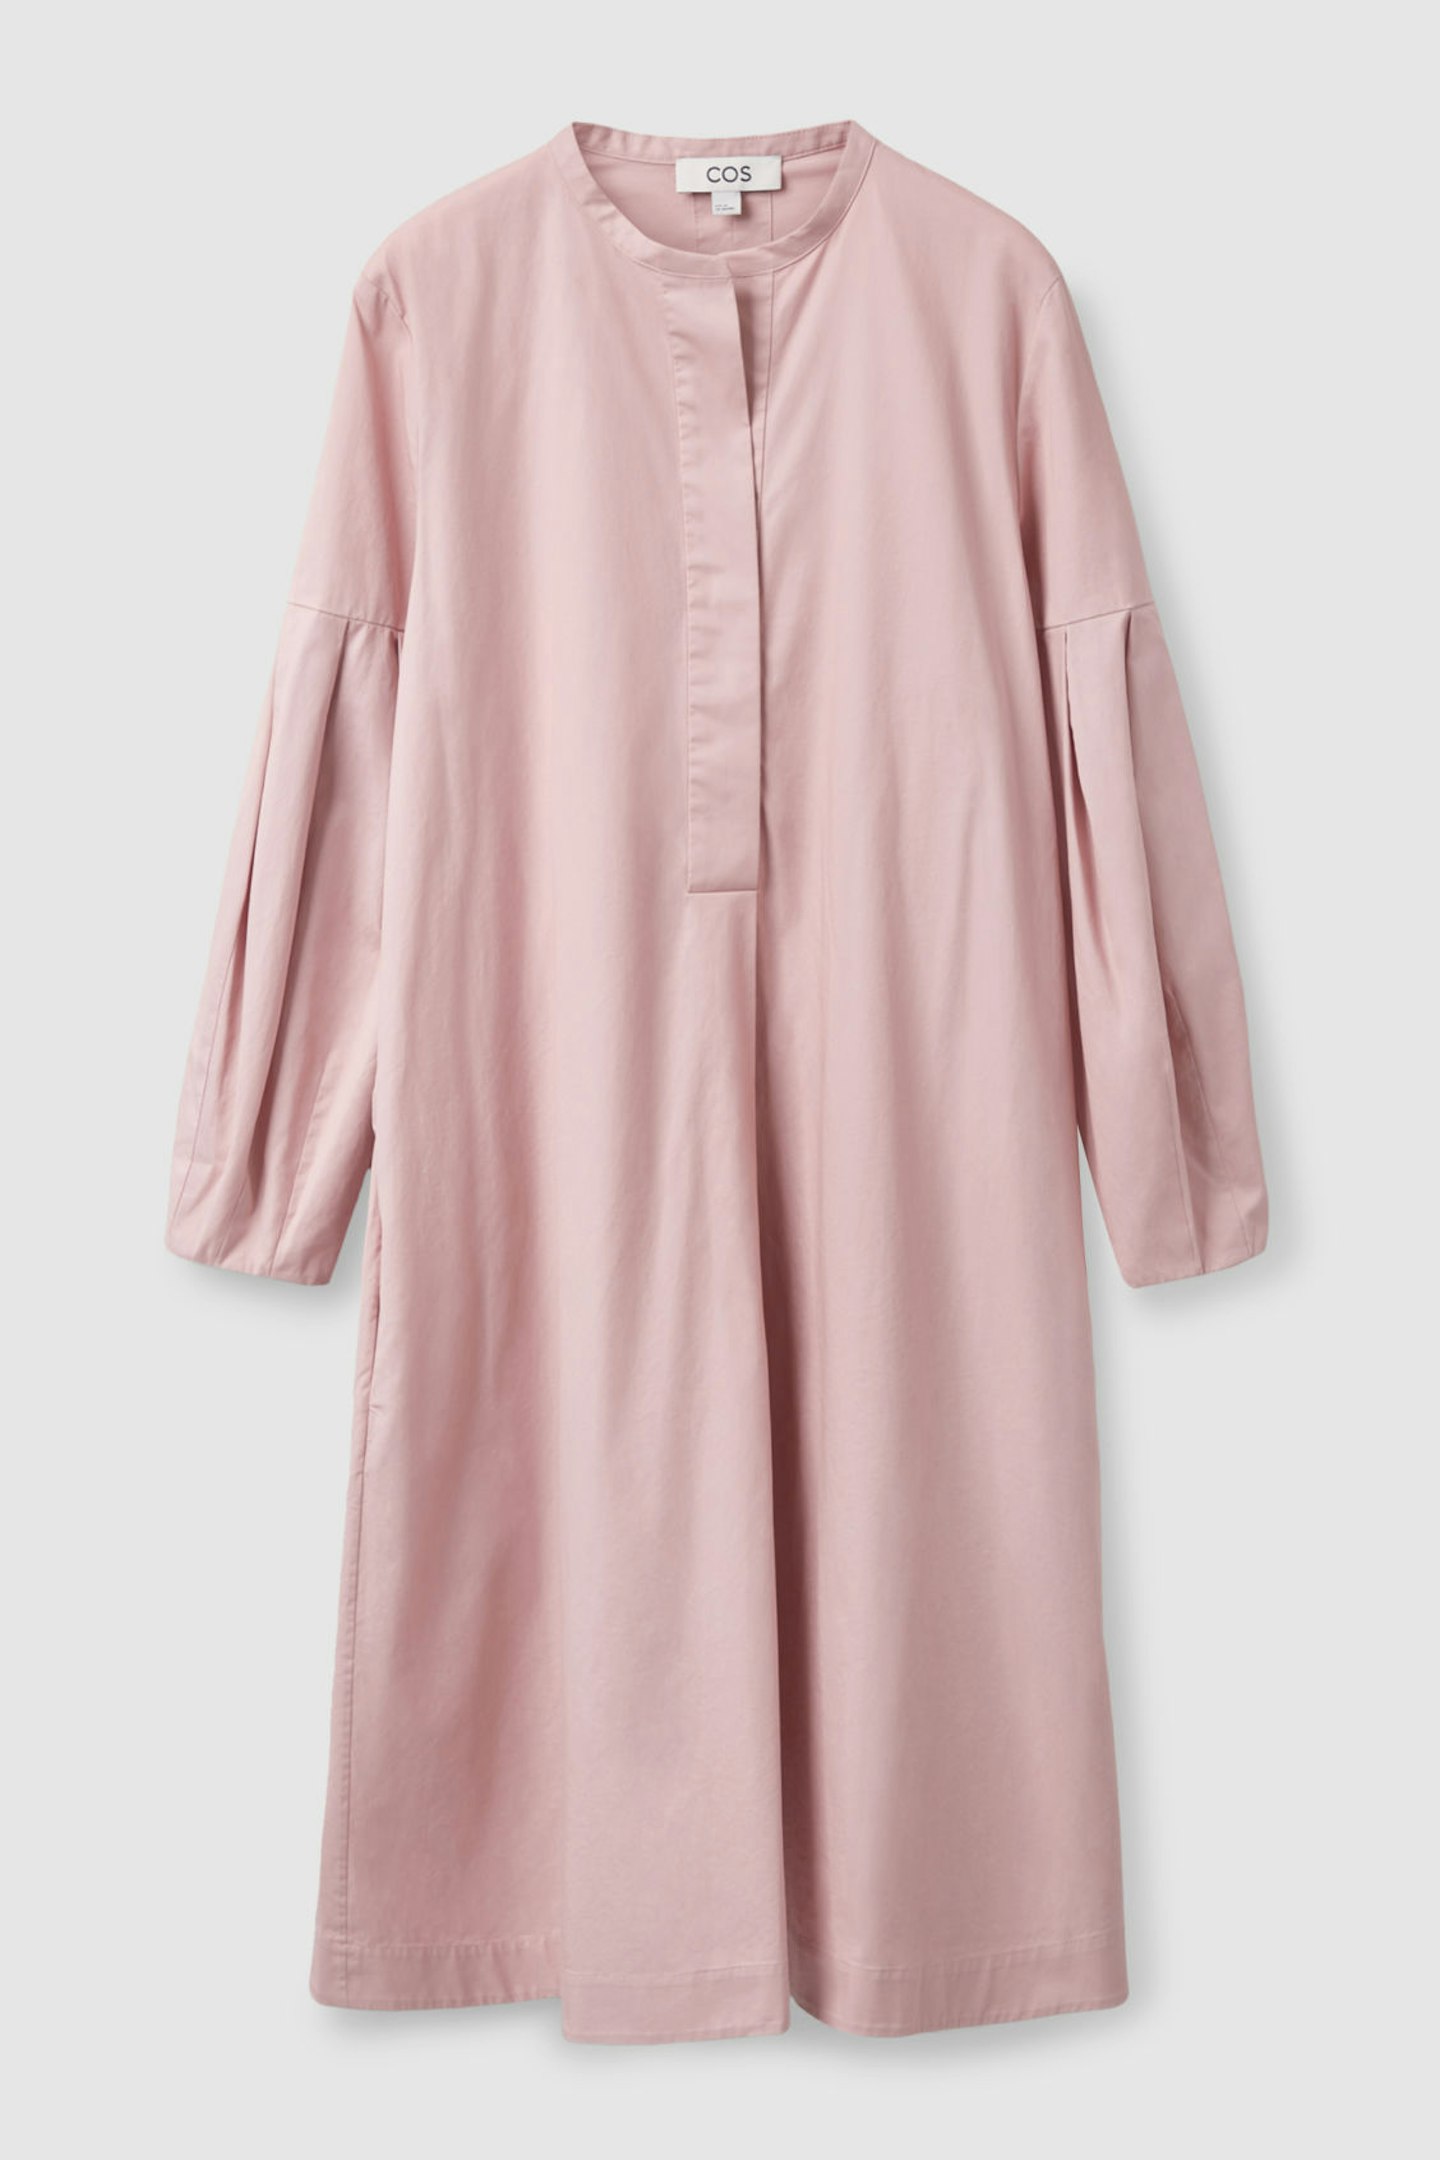 Pleated Shirt Dress, WAS £69 NOW £48.30